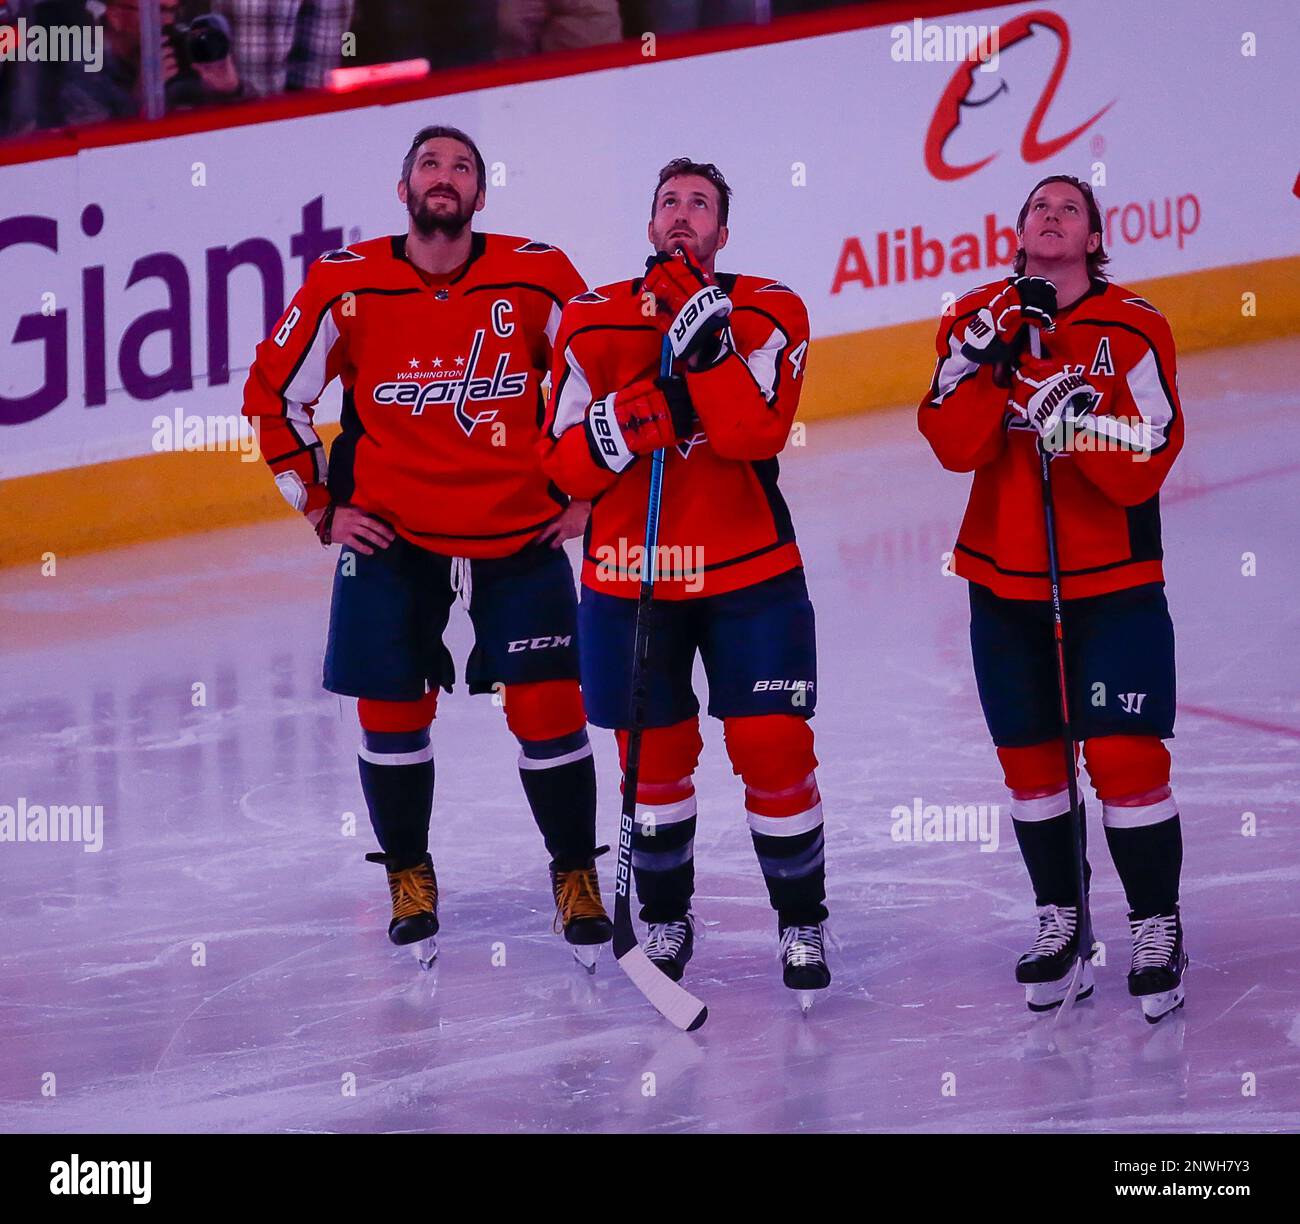 2018 Stanley Cup Final - Alex Ovechkin and the Washington Capitals